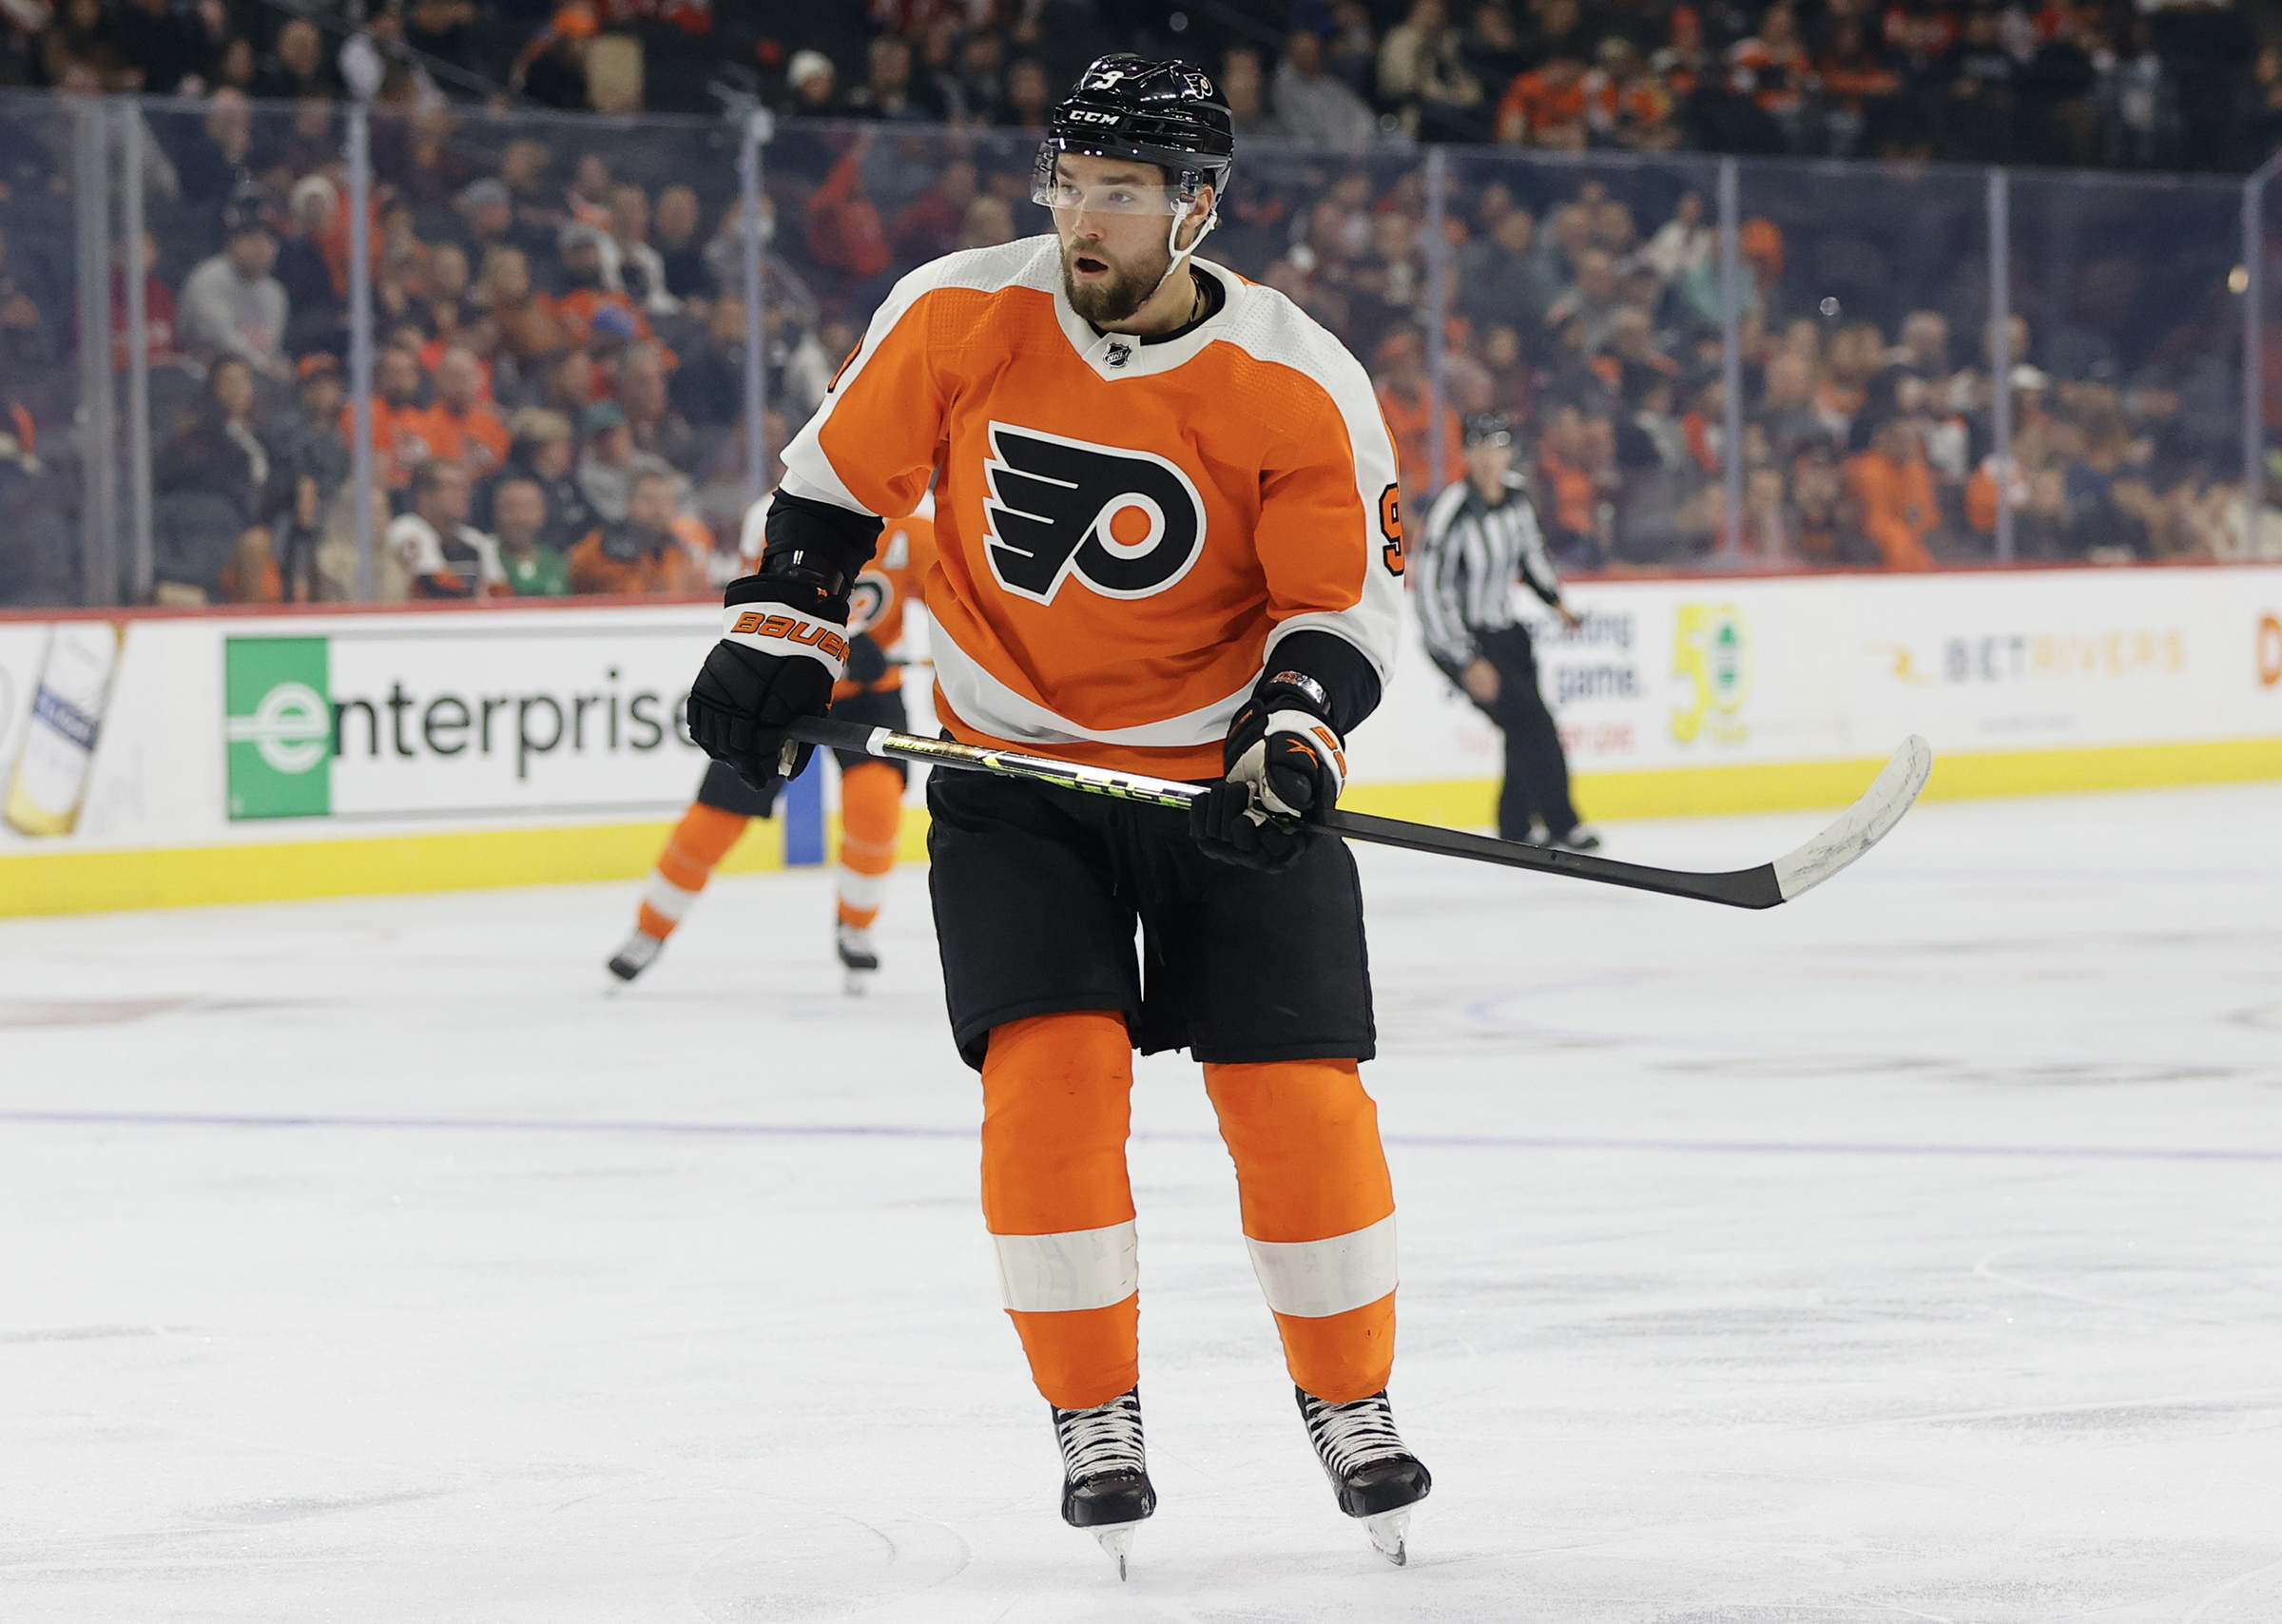 Ivan Provorov's Jersey SELLS OUT After Woke Mob Tries To CANCEL